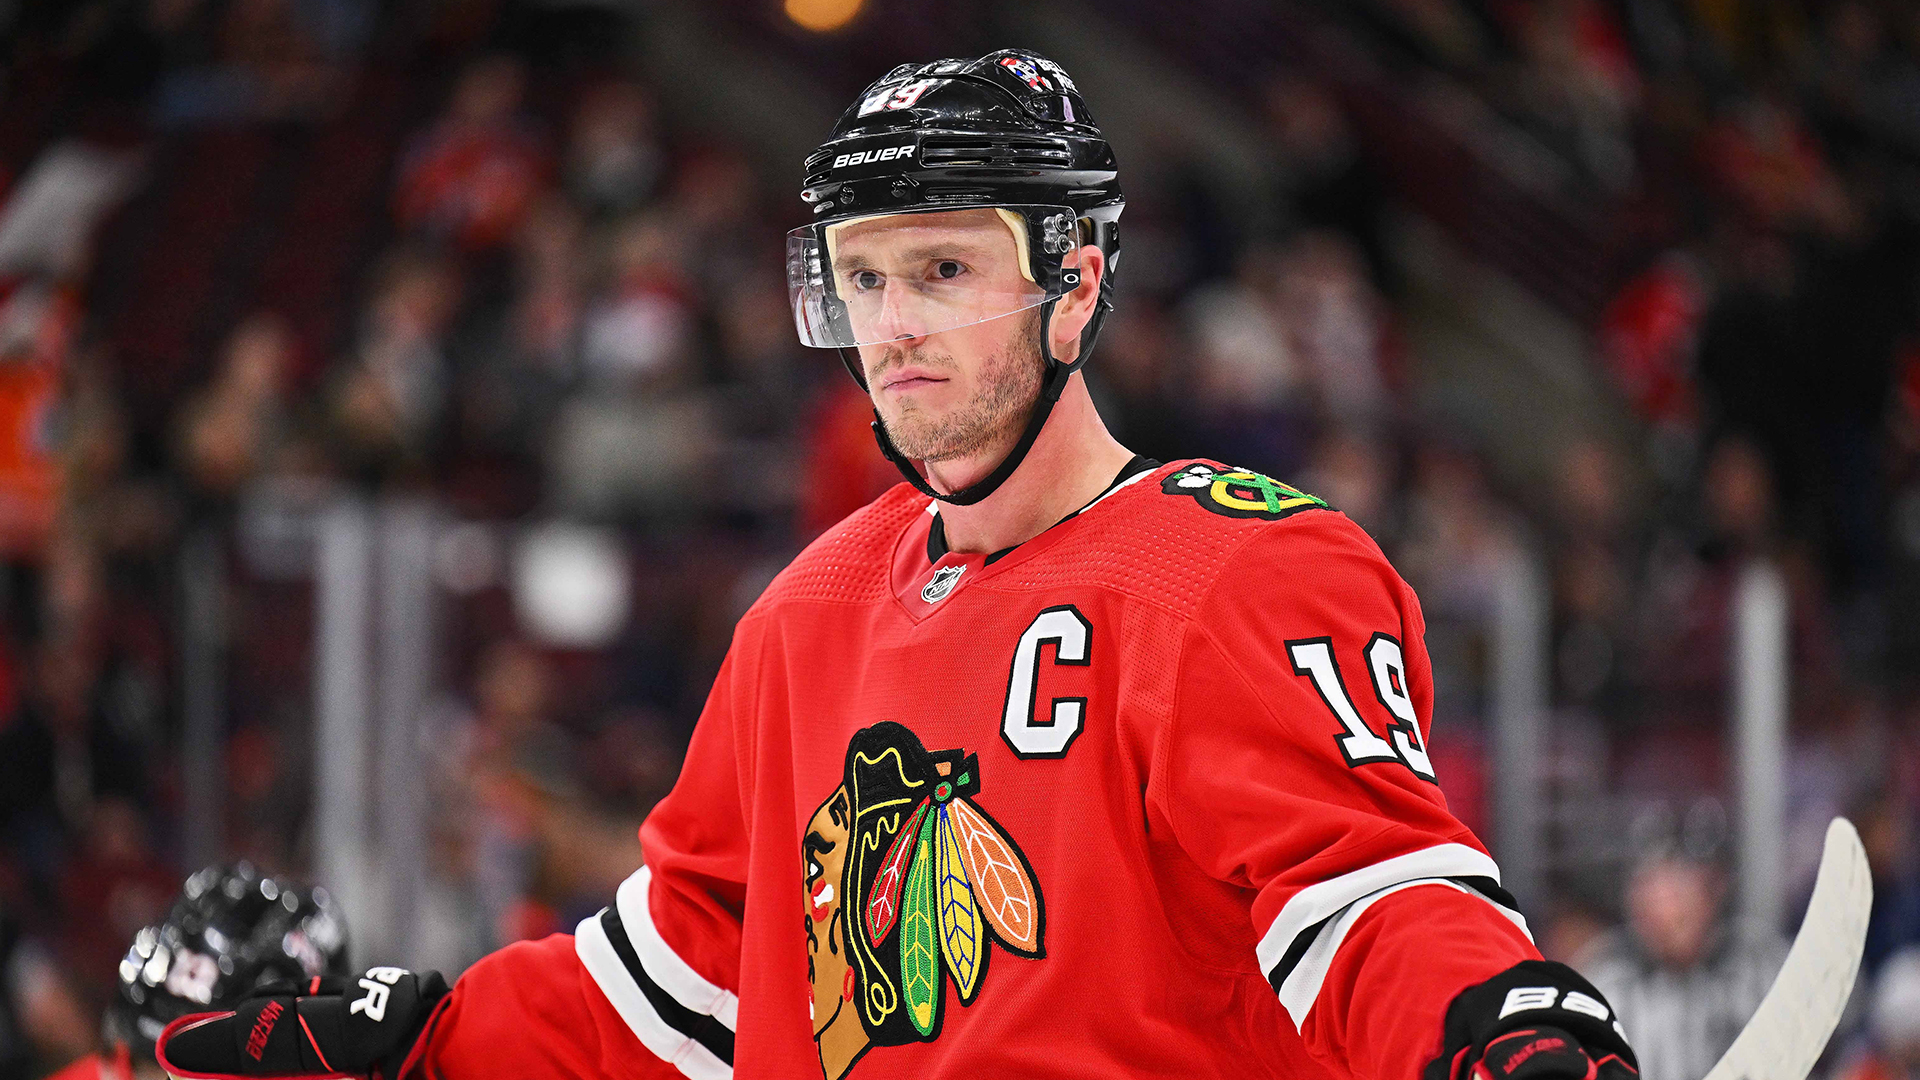 Relive Blackhawks captain Jonathan Toews' best moments in Chicago 